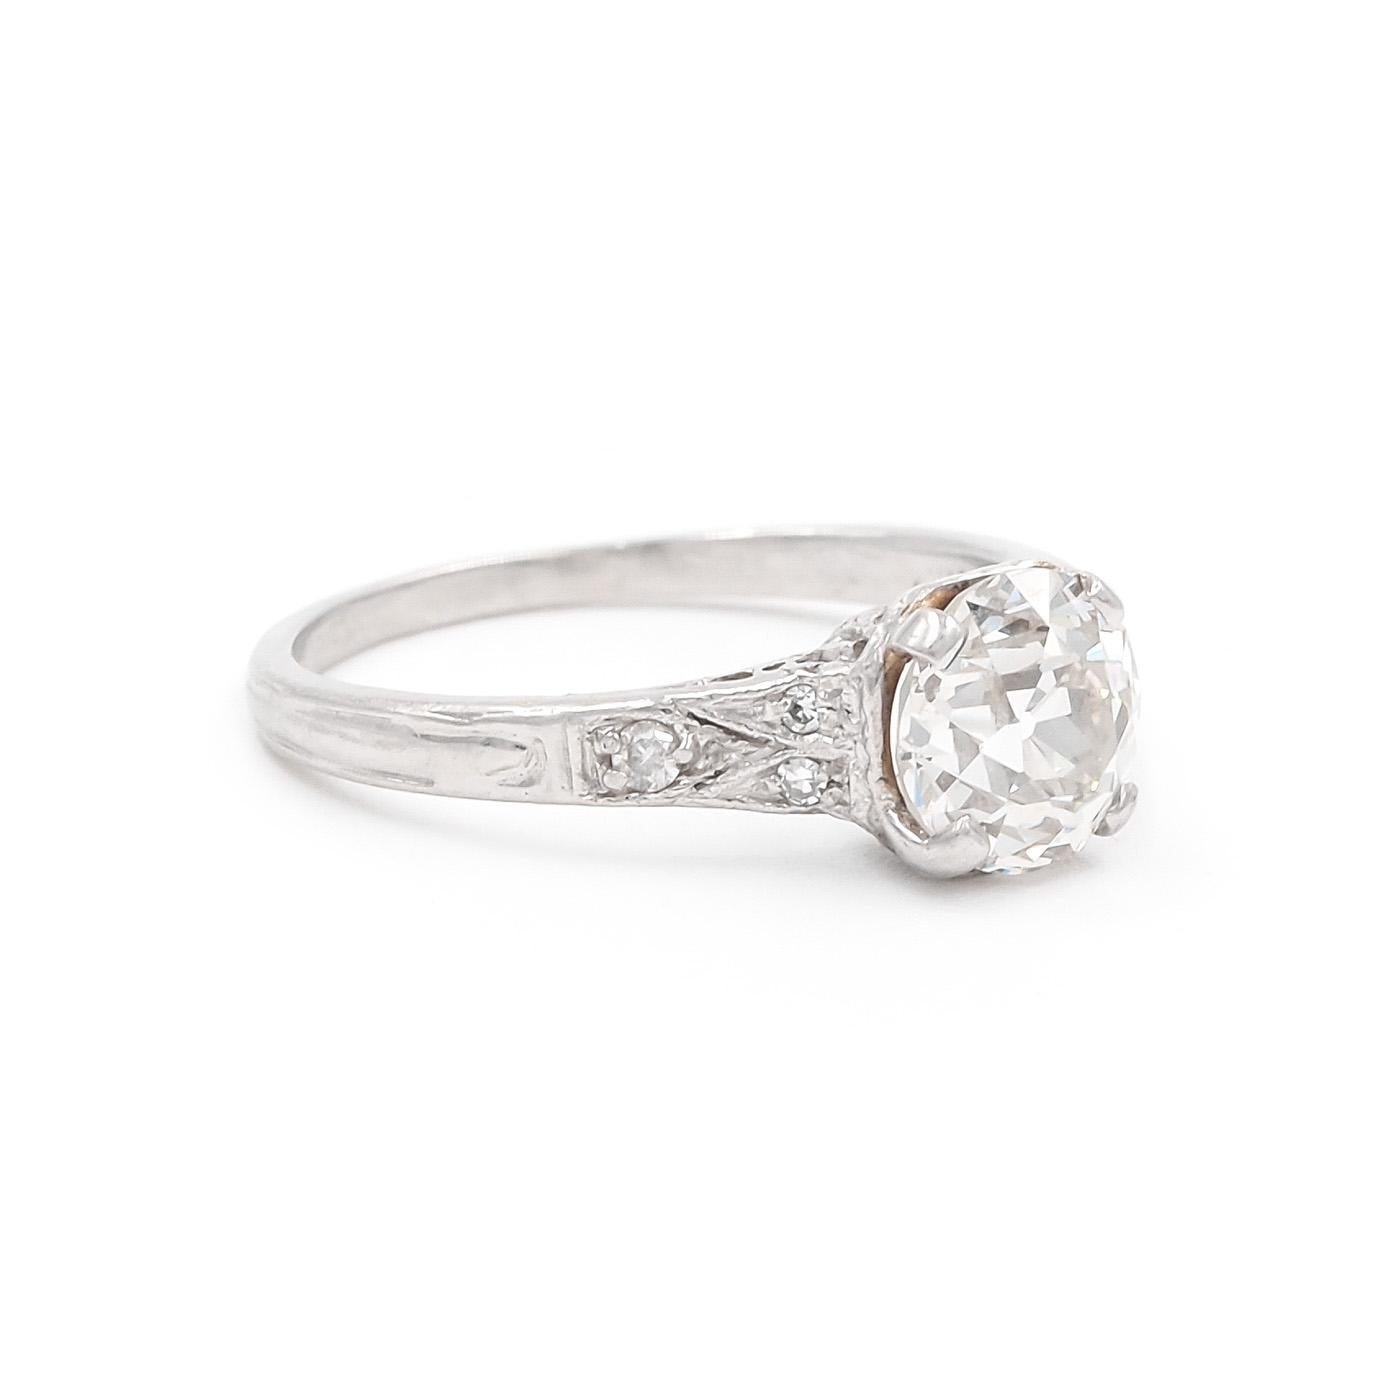 Early Art Deco era 1.21 Carat Old European Cut Diamond Engagement Ring composed of platinum. The 1.21 carat Old European Cut diamond is GIA certified J color & SI1 clarity. Set with an additional 6 Single Cut diamonds weighing approximately 0.05